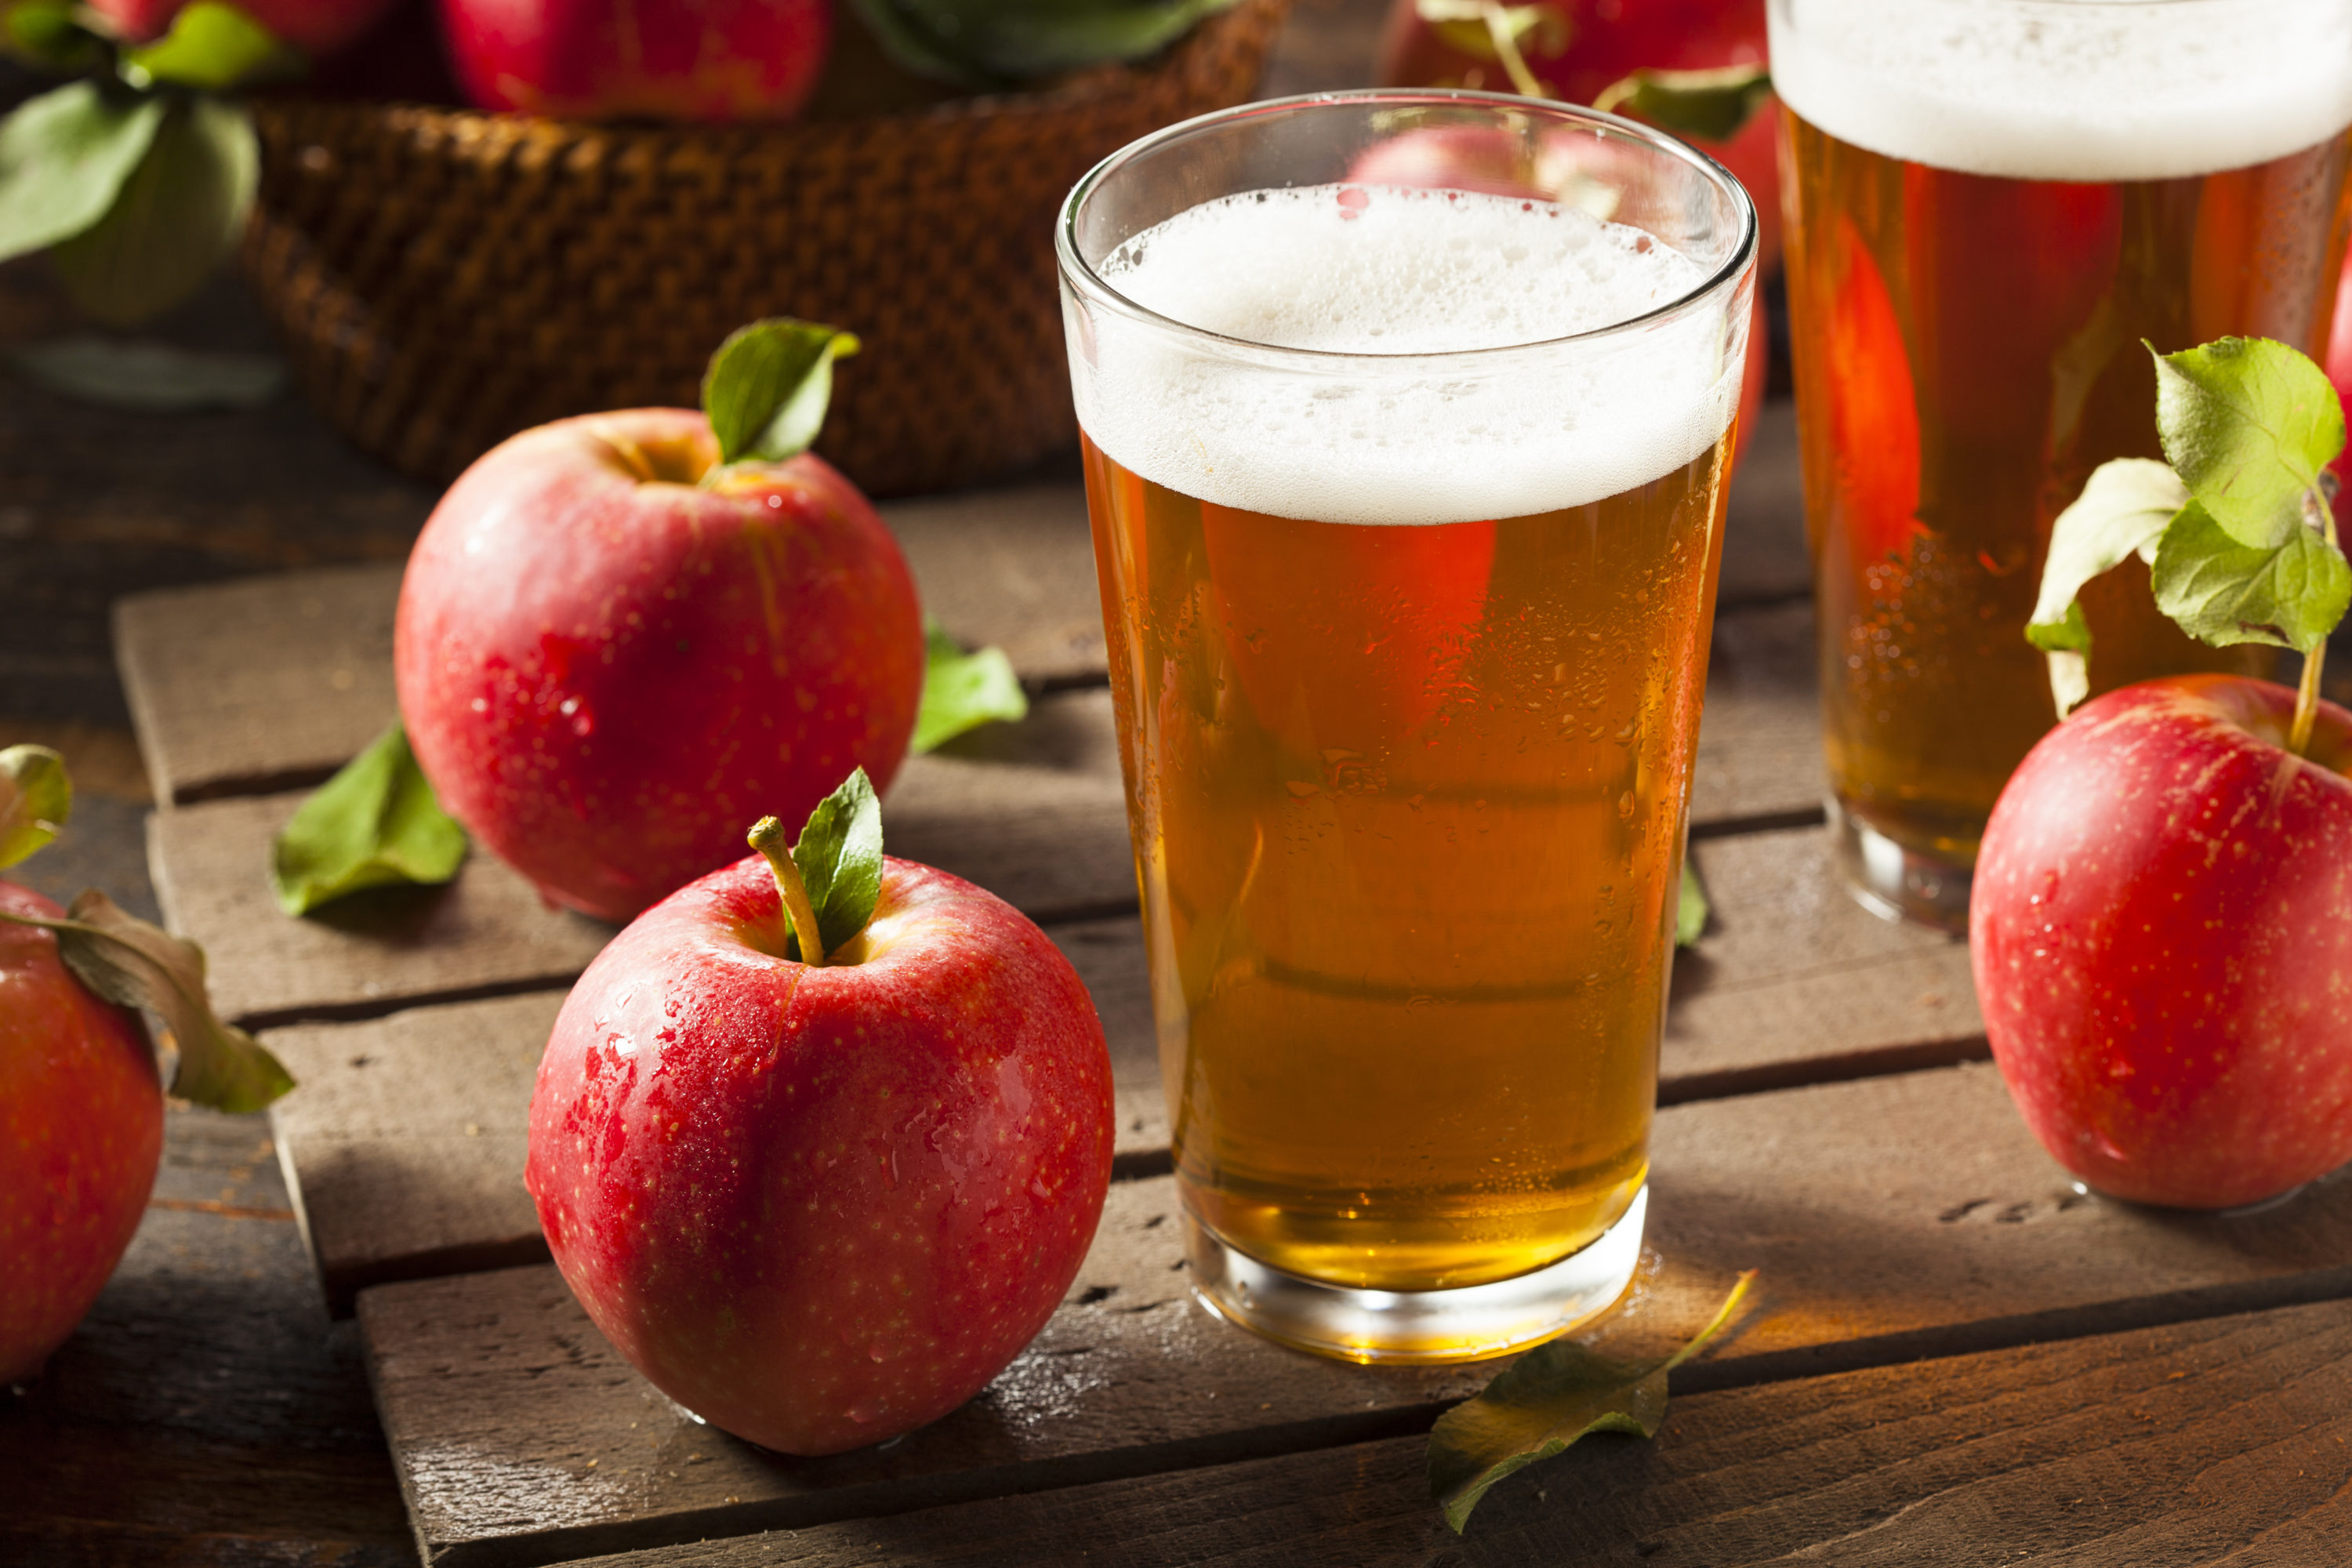 Serving Cider: A Guide to Glassware